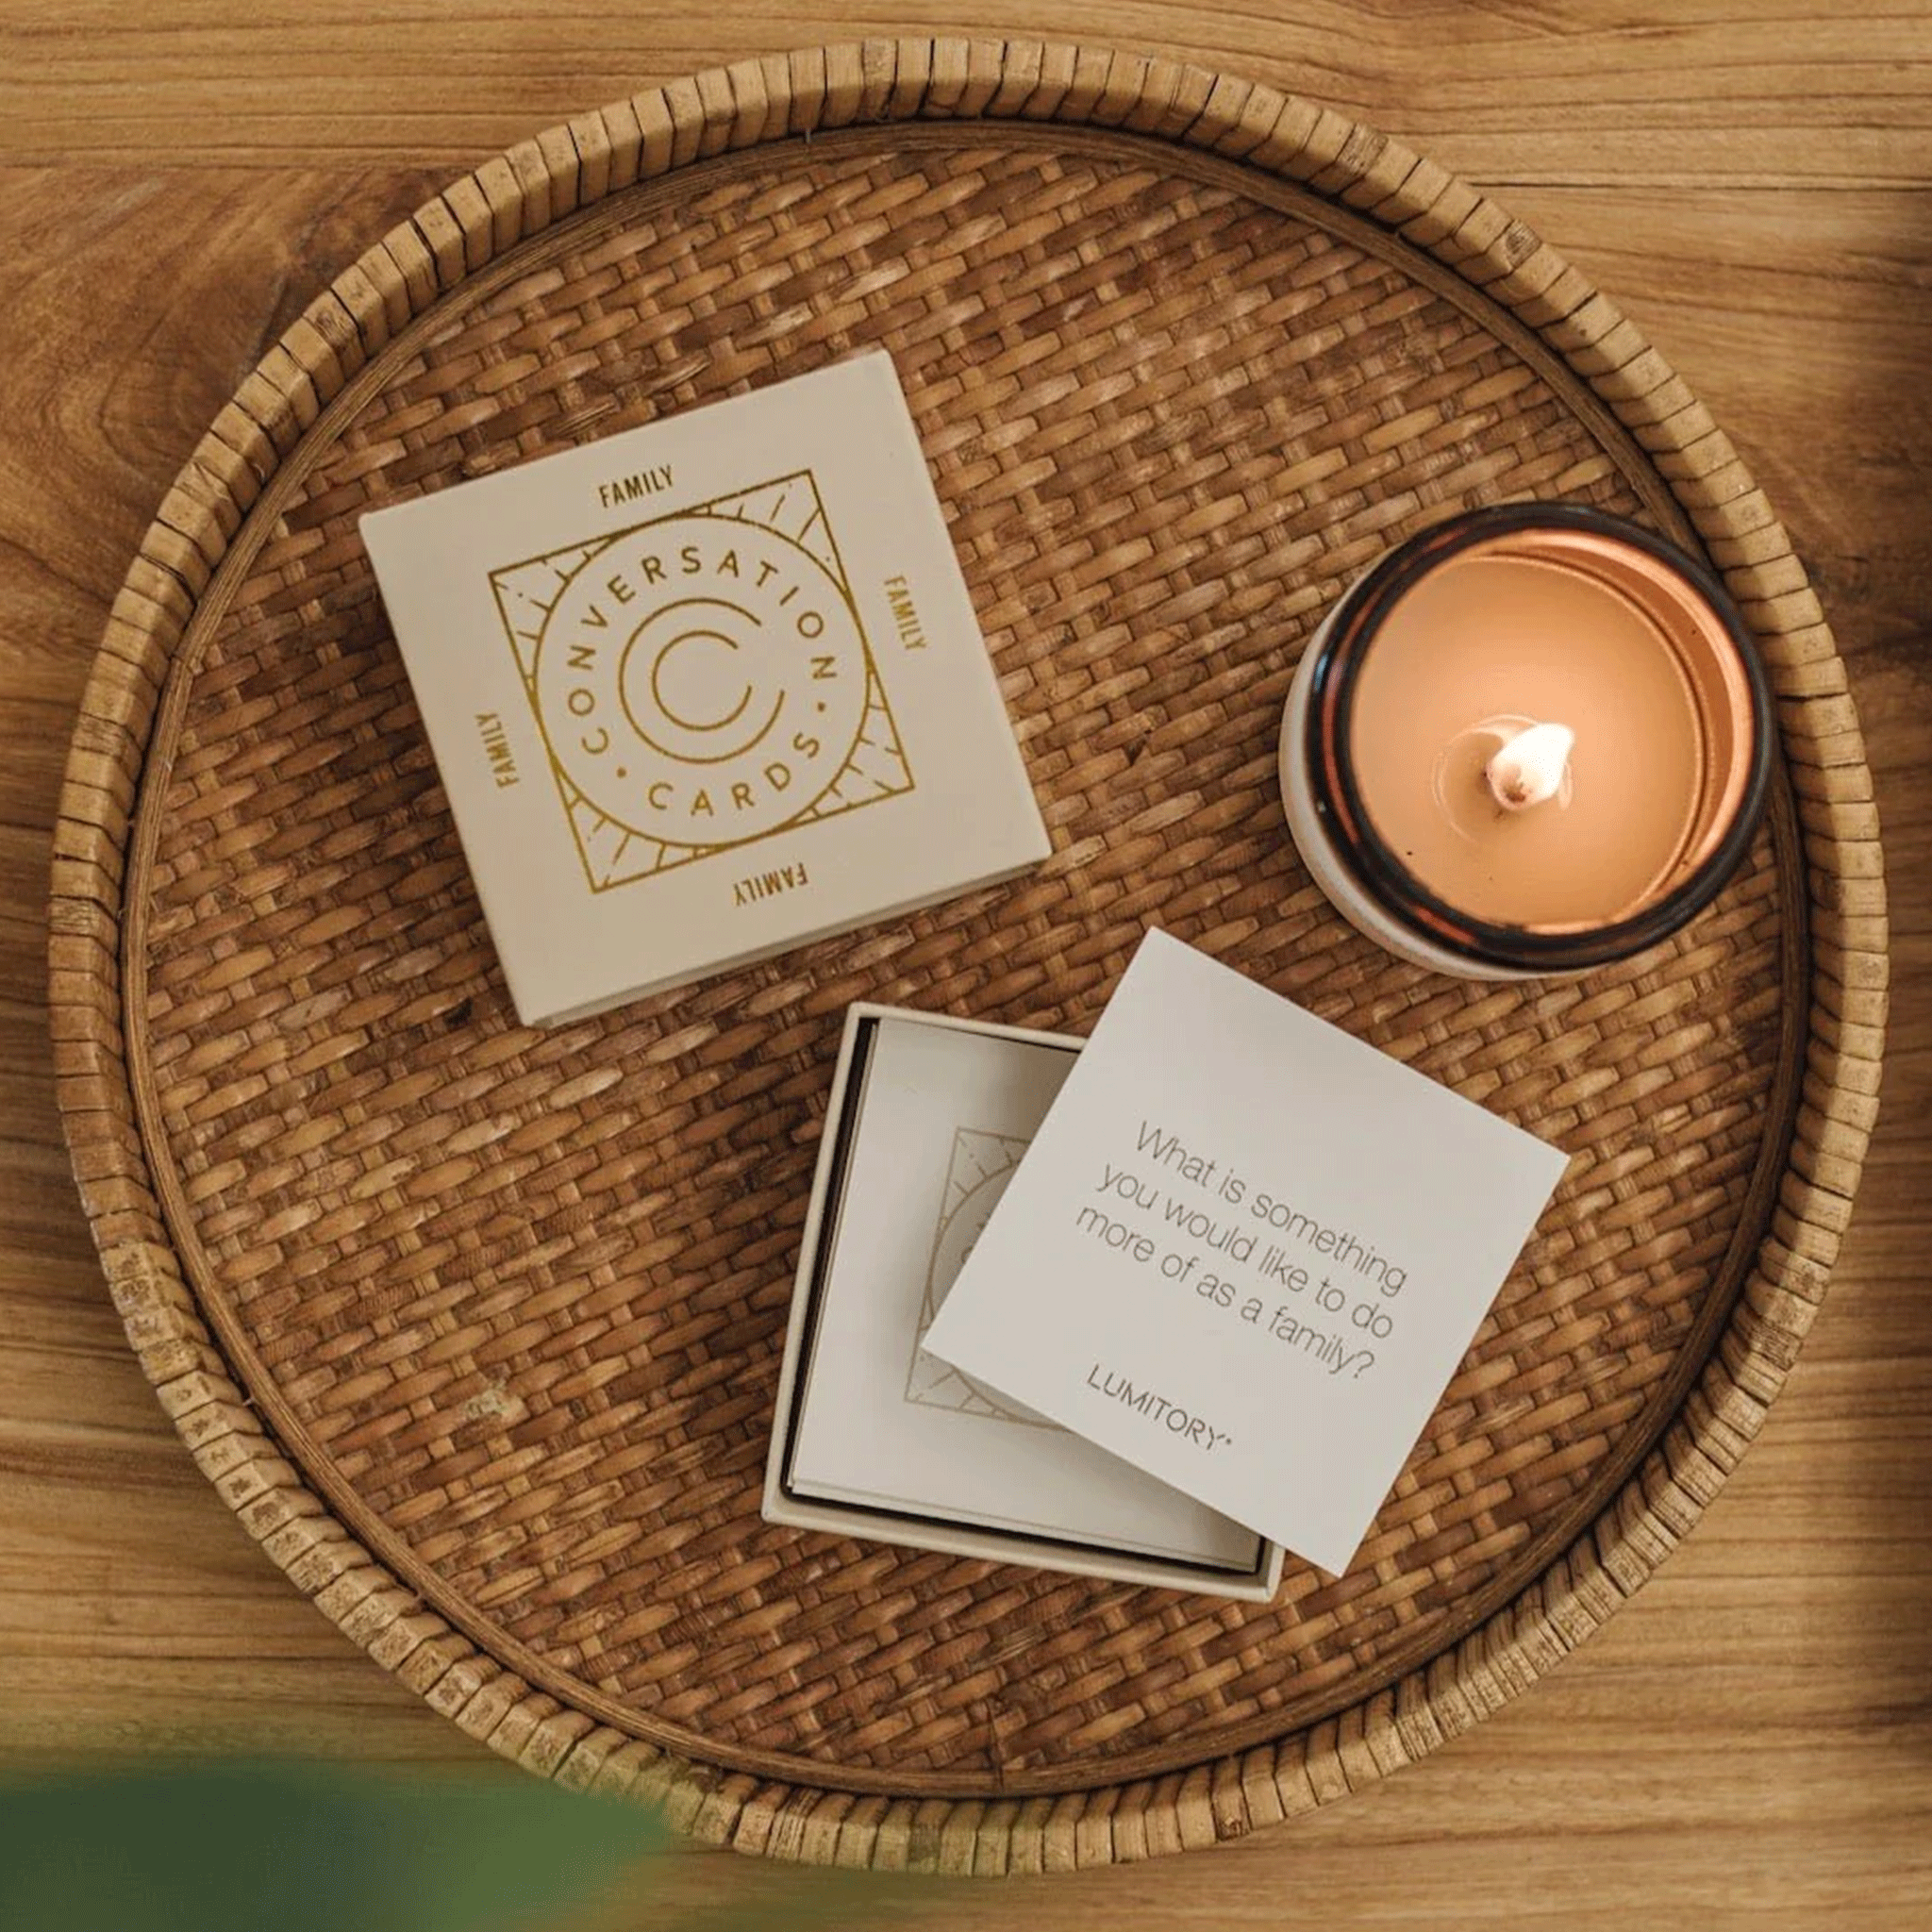 On a wicker tray is a box of conversation cards with a question that reads, "What is something you would like to do more of as a family?".